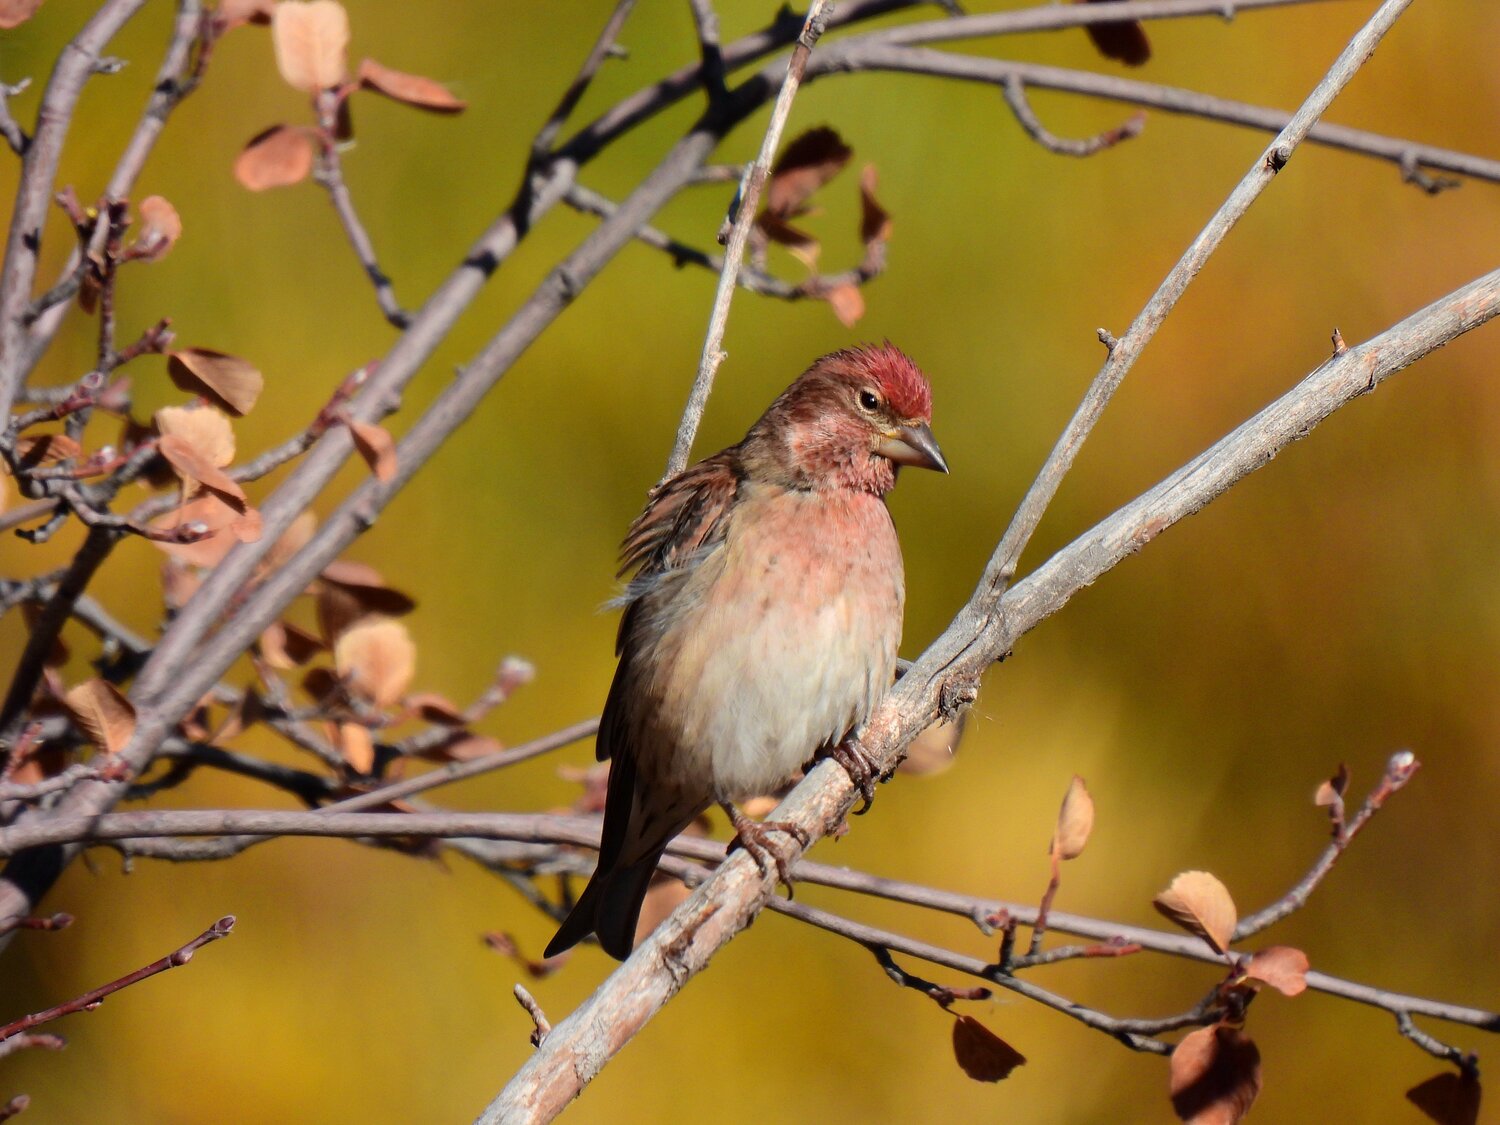 This week’s Bird of the Week, compliments of the Weminuche Audubon Society and Audubon Rockies, is the Cassin’s finch. 
Attentive hikers in the forests of Pagosa Country will likely encounter this small- to medium-sized finch, the Cassin’s finch. In the southwestern United States, they are found at elevations from 3,000 feet to 10,000 feet. In our area, they are year-round residents which drop to lower elevations in the winter. Here they may be found in greater numbers at our feeders enjoying sunflower seeds, which they easily break open with their stout, conical beaks.
The males can be distinguished from very similar-looking house finches by the lack of streaking on their breasts and a much redder crown. Females of both these finch species are similar in coloration and streaking patterns on their breasts, but the Cassin’s female body is more compact compared to the house finch female.
Cassin’s finches tend to feed on seeds and insects, with aspen buds making up a significant part of their diet in the spring. Insects, including the larvae of destructive Douglas-fir tussock moths, are a favored food item in the summer.
Female Cassin’s finches build a nest using various plant materials, animal hair, feathers and similar debris near the top of conifer trees. Breeding pairs may occupy nests within a few feet of one another once eggs are laid, but before incubation begins, the female is often the aggressor, chasing other males from the area.
The Cassin’s finch is considered at risk of extinction because of declining population numbers, particularly in the Northeastern U.S., for reasons that are not well understood. We are indeed fortunate to have this bird species in our area.
For information on events, visit www.weminucheaudubon.org and www.facebook.com/weminucheaudubon/.